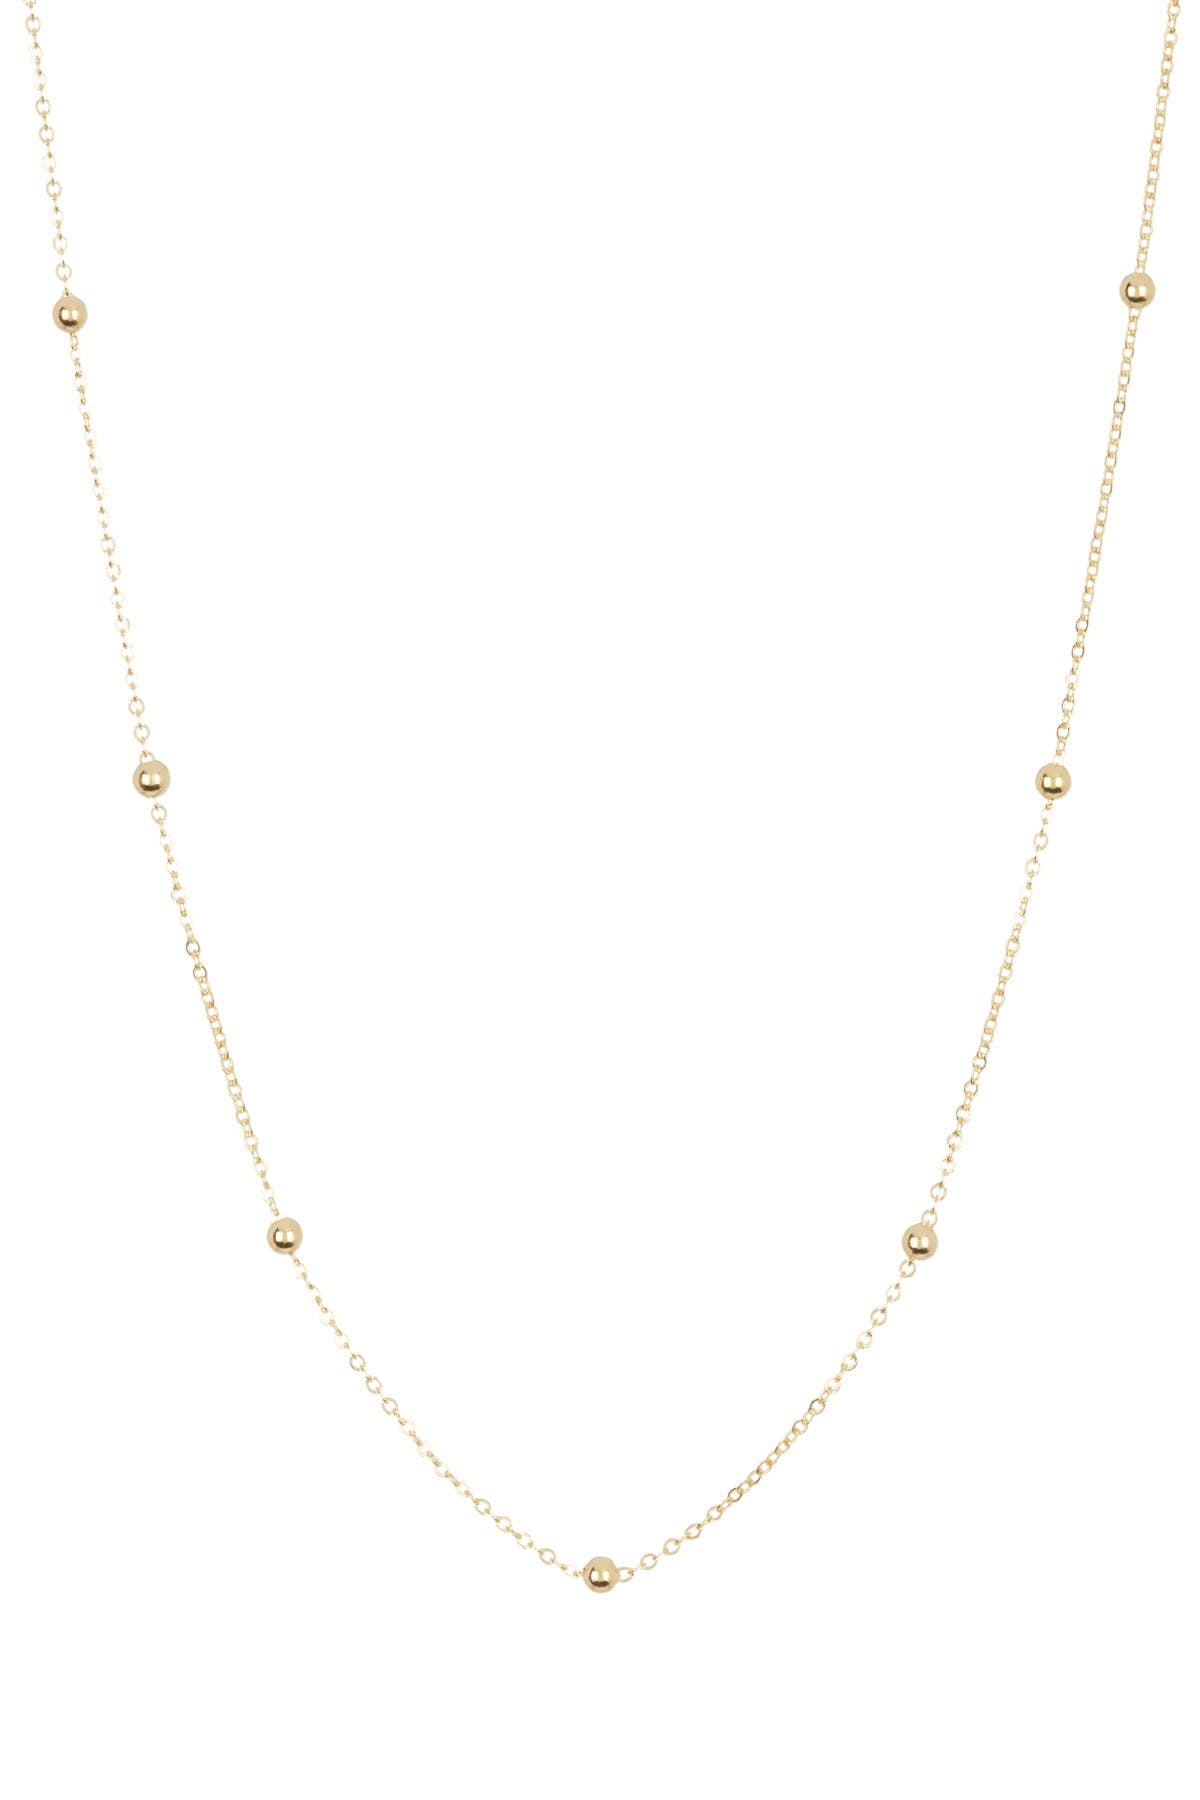 14k Yellow Gold Diamond Cut Bead Station Cable Link Chain Necklace 18"